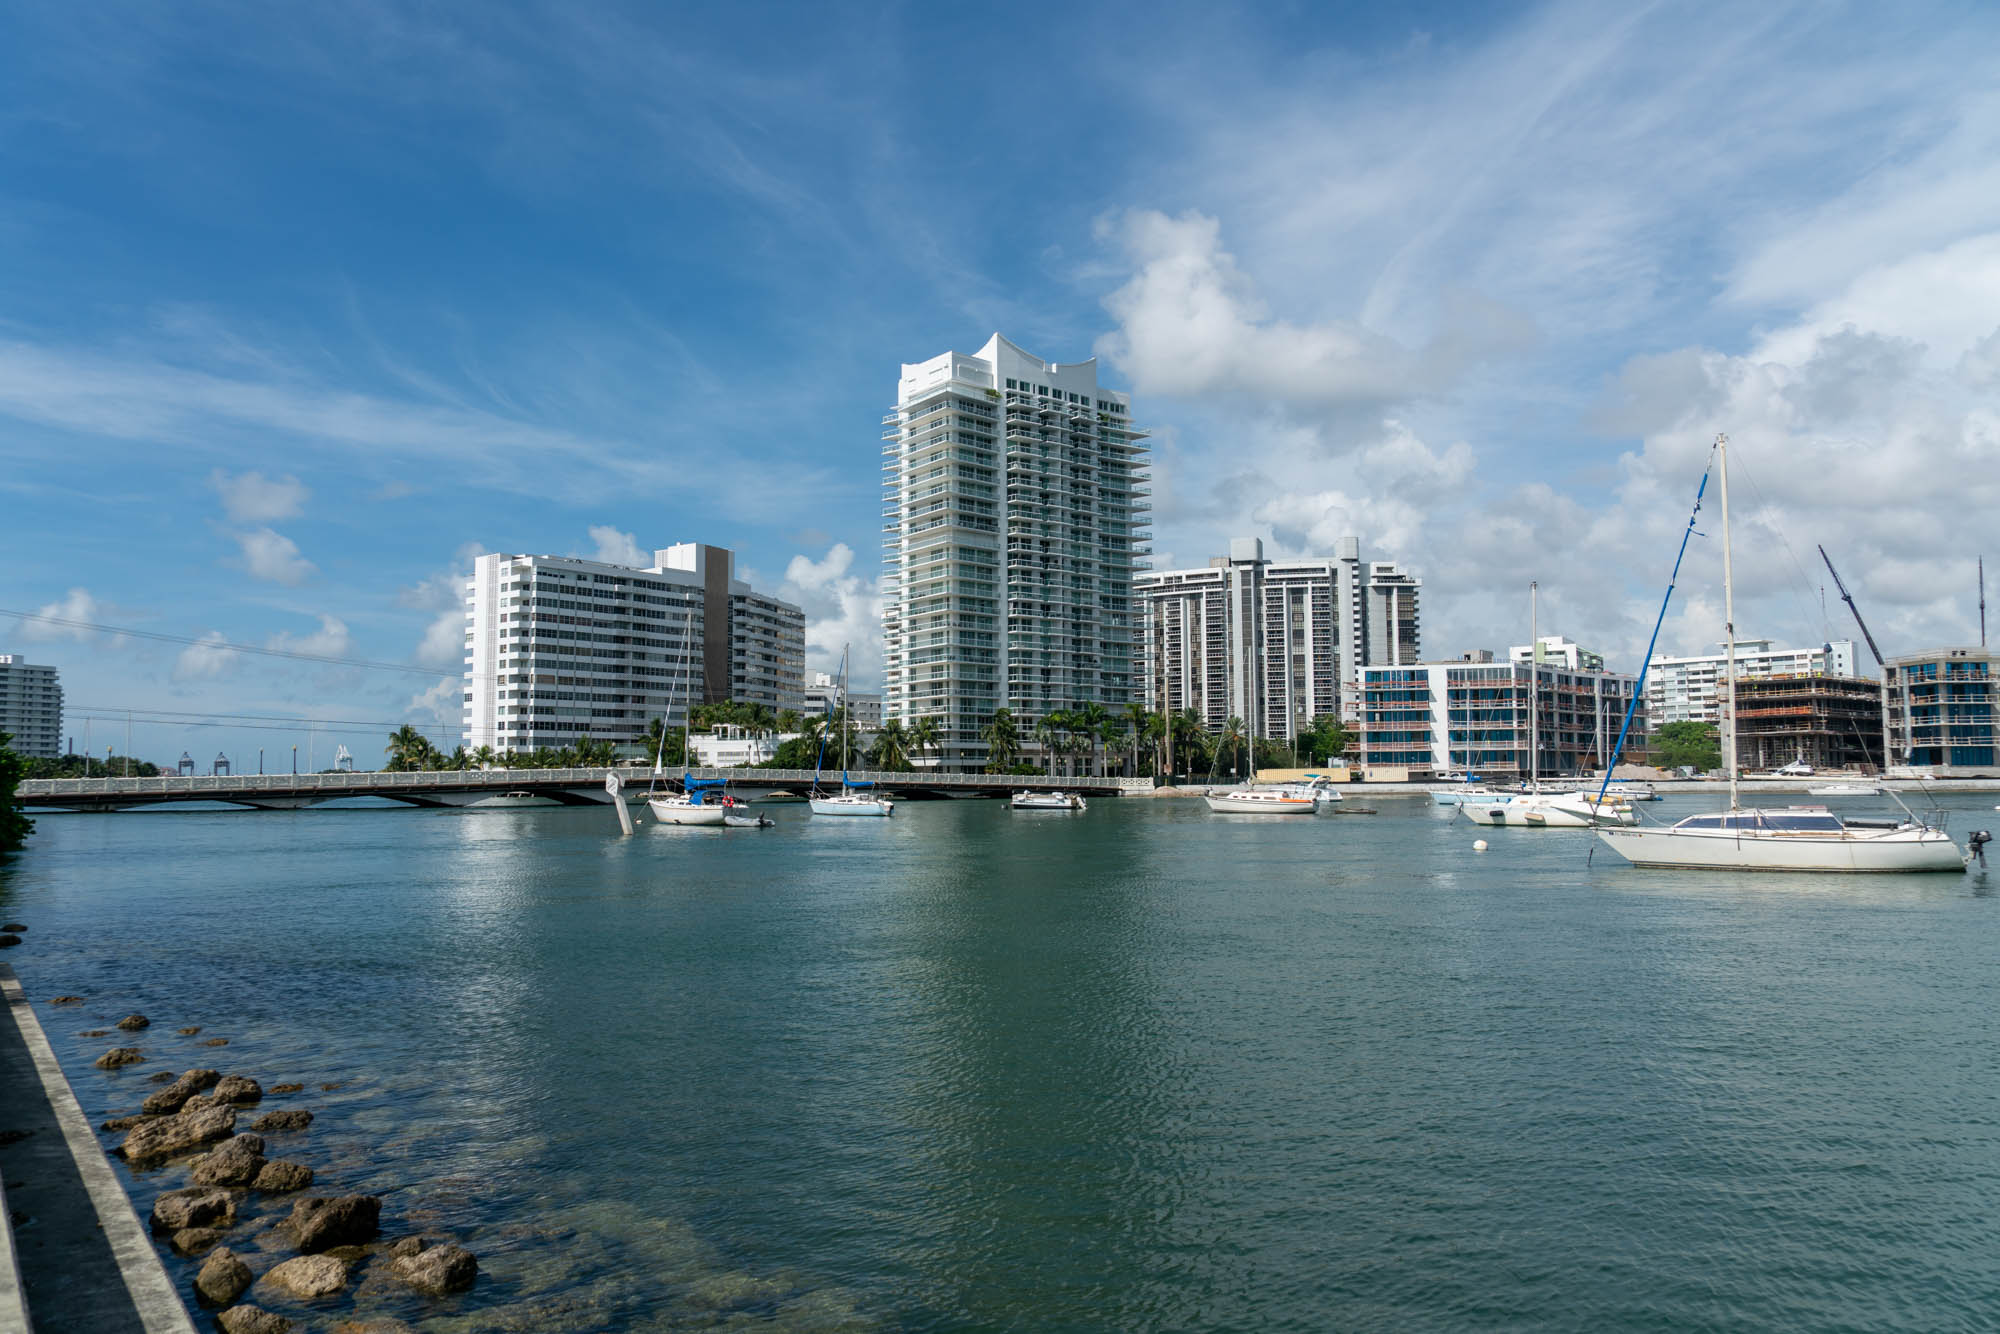 South Florida has been called ground zero for climate change effects. Miami Beach, a barrier island, is like “the canary in the mine shaft,” according to Mayor Dan Gelber. The city has begun a $500 million project to raise roads and install pumps to clear stormwater and control street flooding. (Jordan Laird, News21)